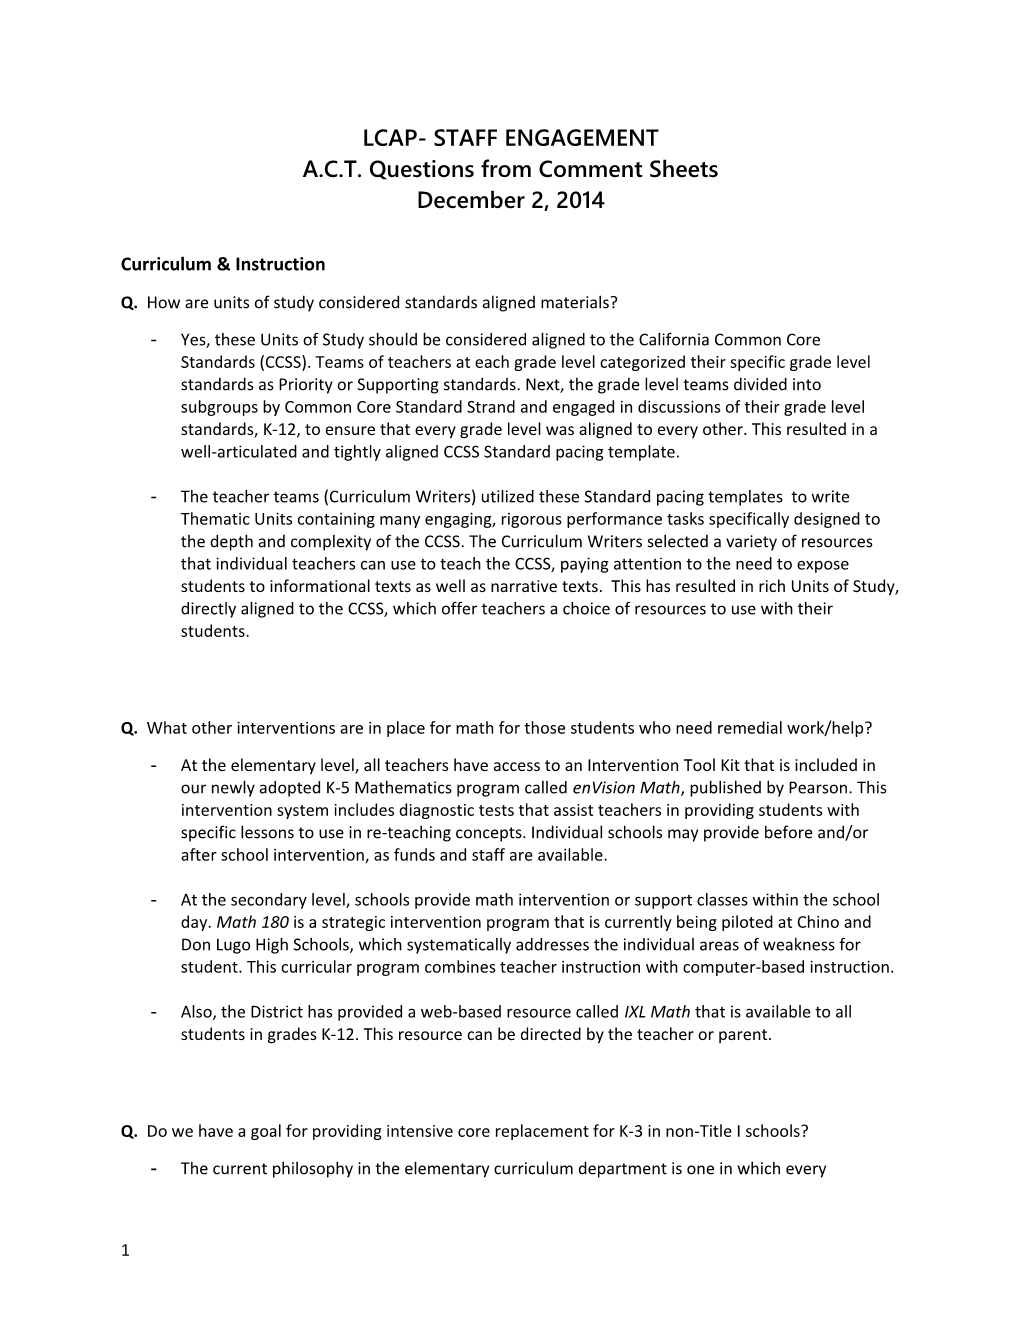 A.C.T. Questions from Comment Sheets